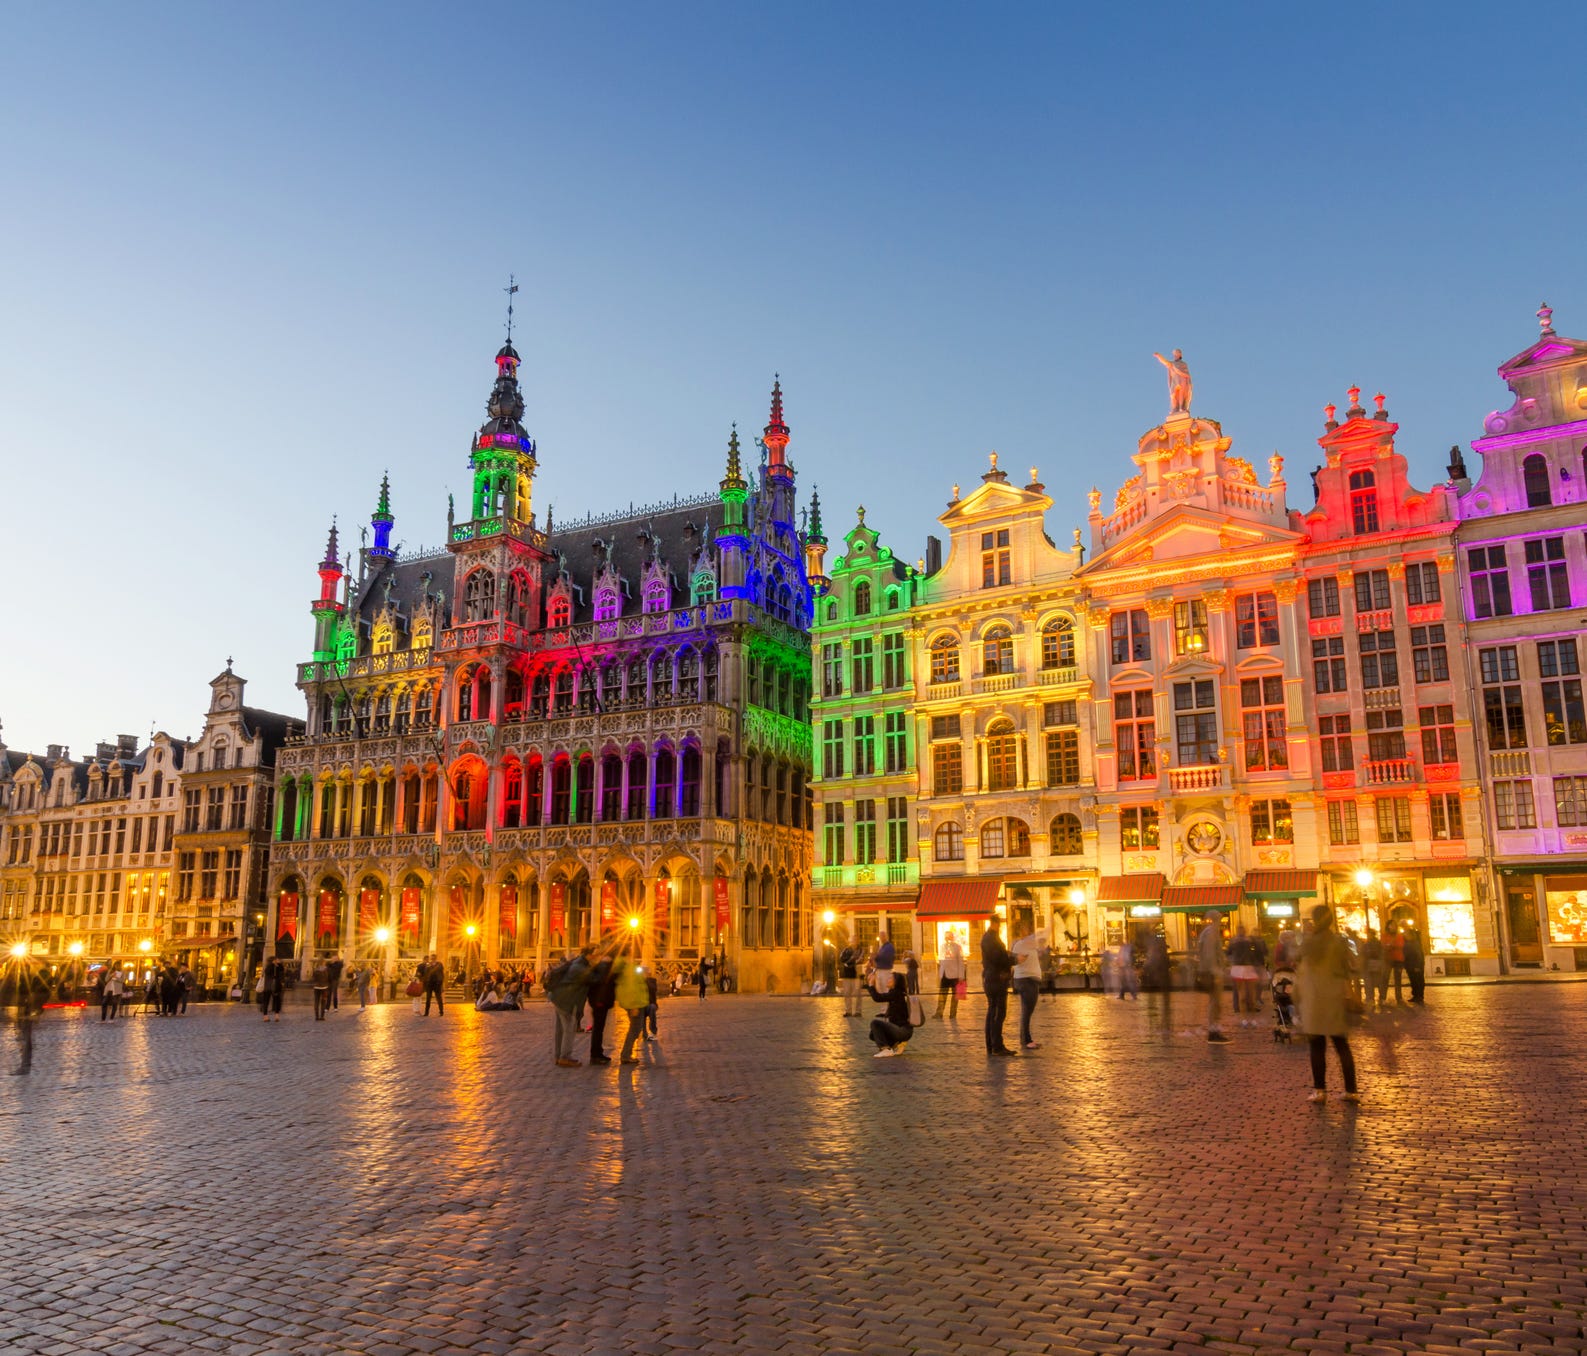 The Grand Place in Brussels.